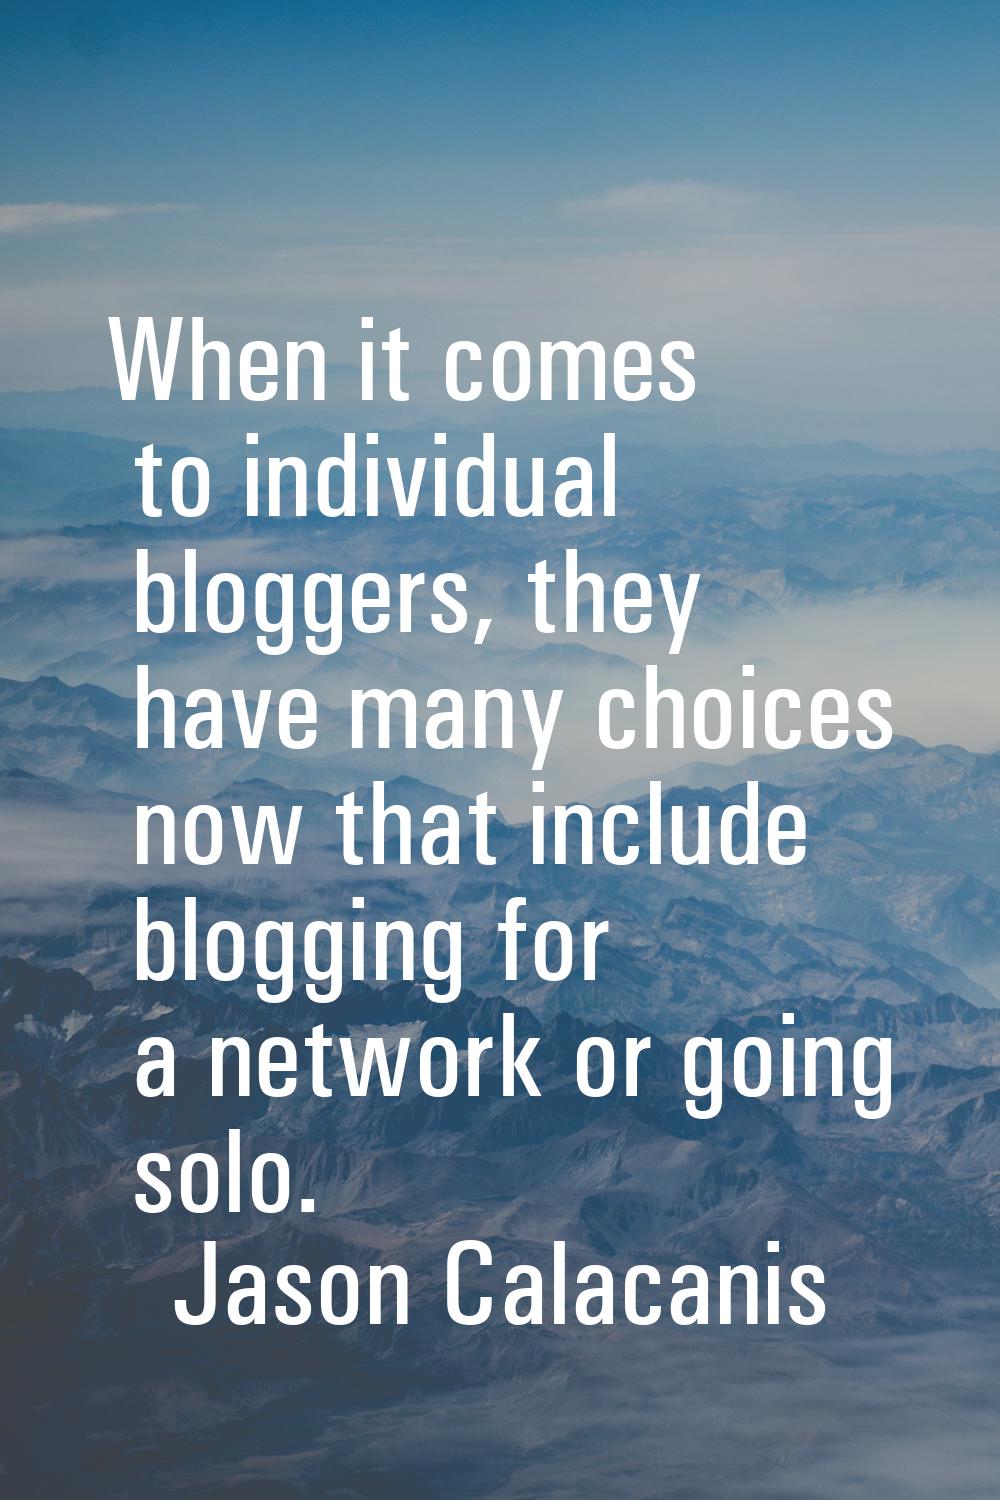 When it comes to individual bloggers, they have many choices now that include blogging for a networ